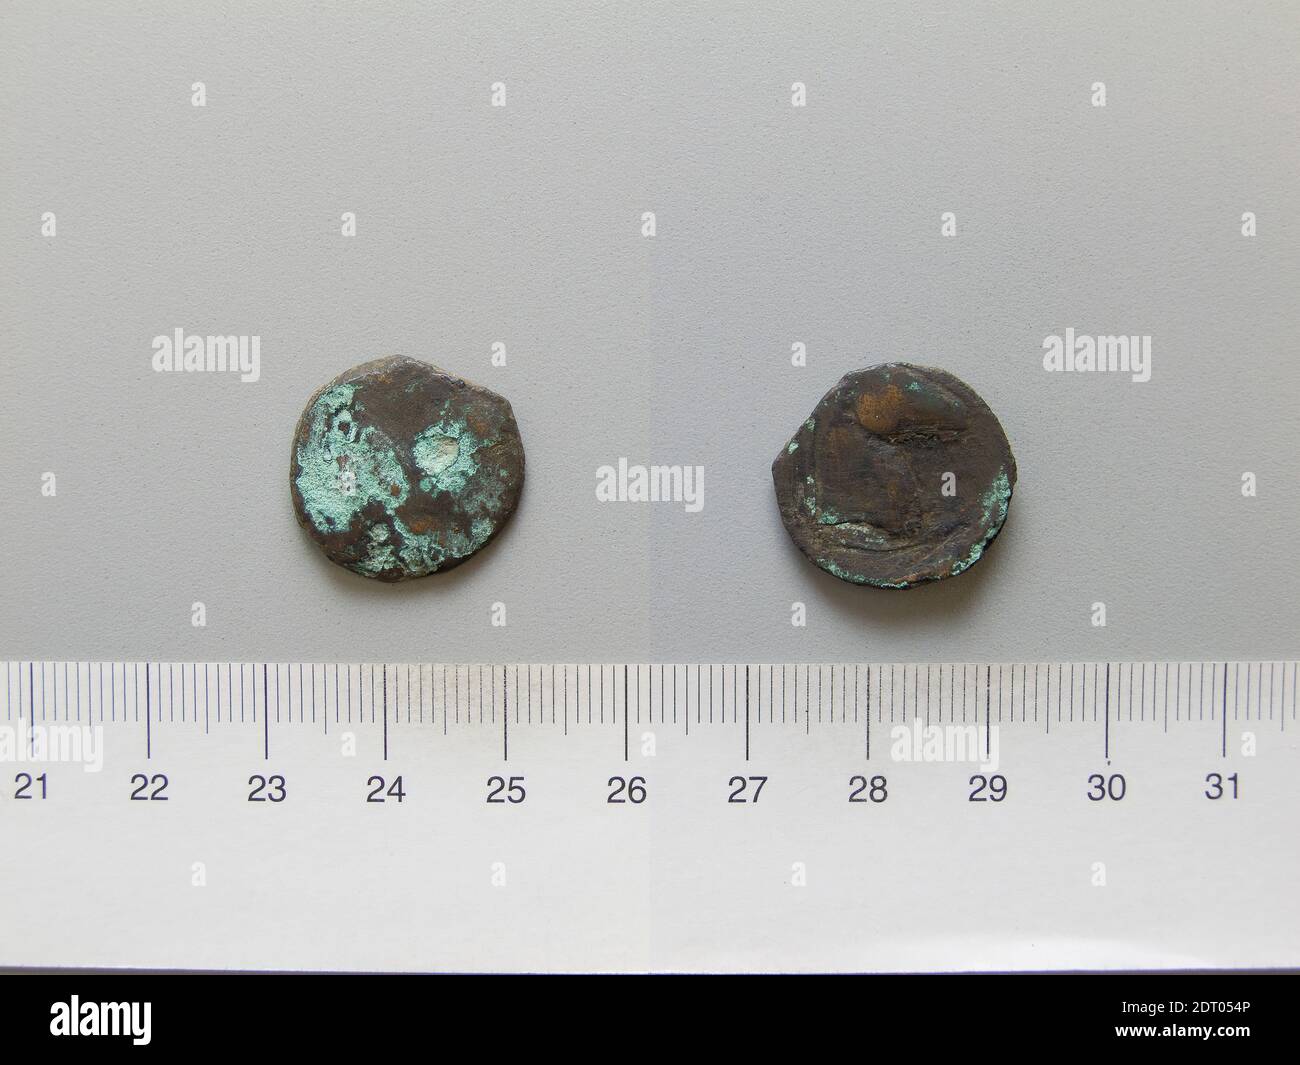 Mint: Sicily, Coin from Sicily, 399–200 B.C., Copper, 4.60 g, 9:00, 20 mm, Made in Sicily, Greek, 4th–3rd century B.C., Numismatics Stock Photo